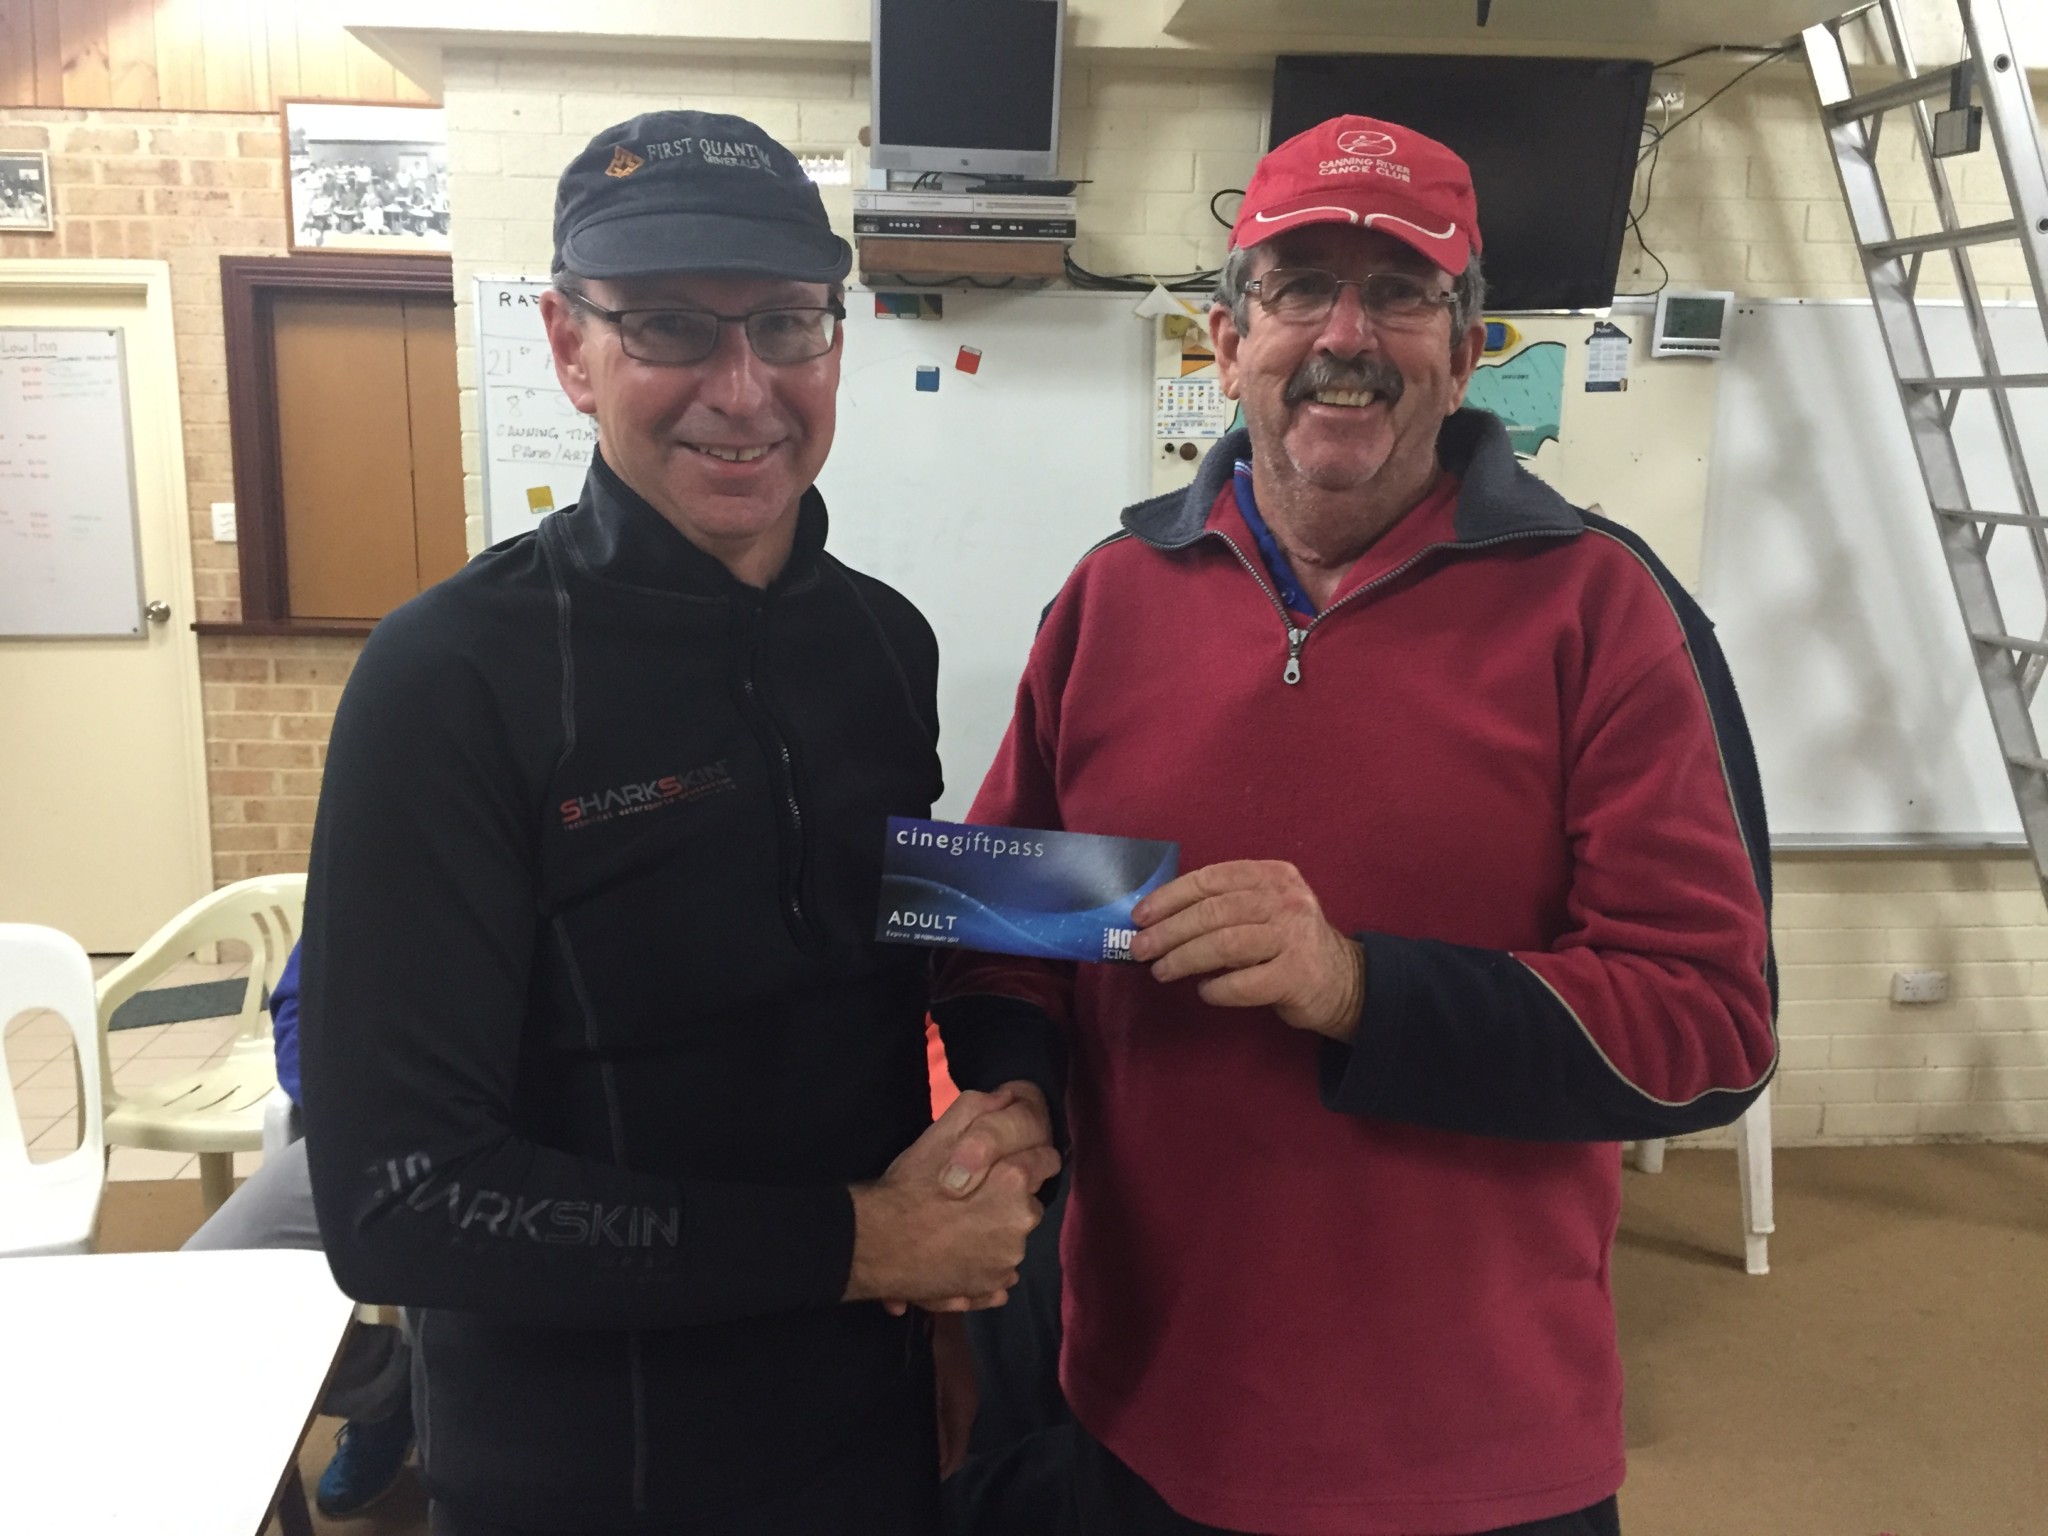 Tues 20th Sep 2016 : David Griffiths presenting David Urquhart with a movie voucher